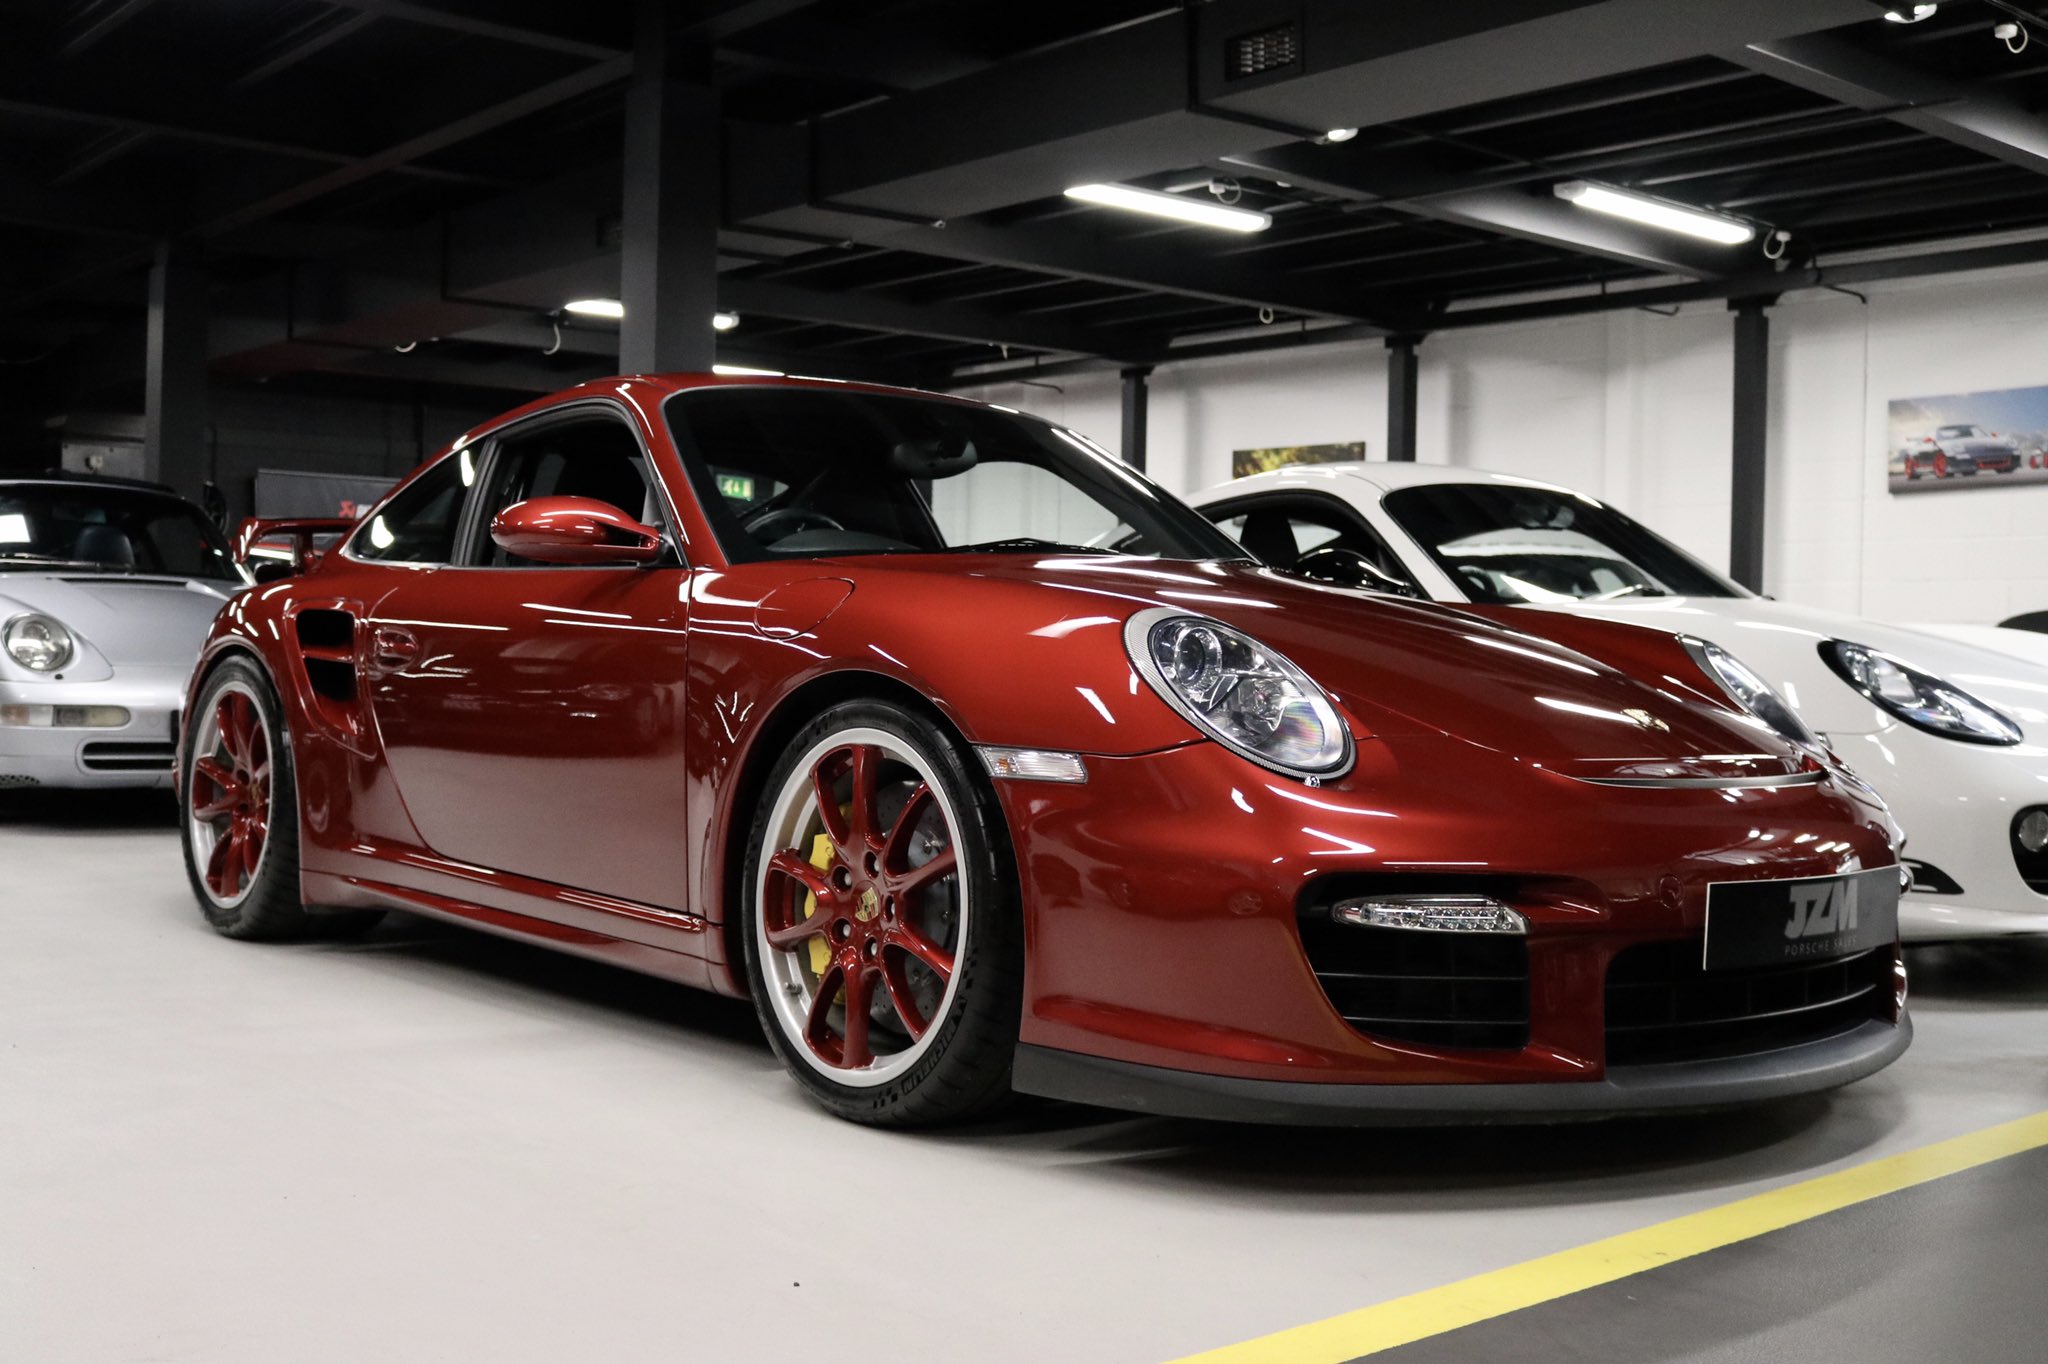 JZM Porsche (est. on Twitter: "Ruby, Ruby, Ruby, 📸 New Stock, 997 GT2 Clubsport In the Super Rare Ruby Red Metallic 😍 https://t.co/lRogoLW95M" /